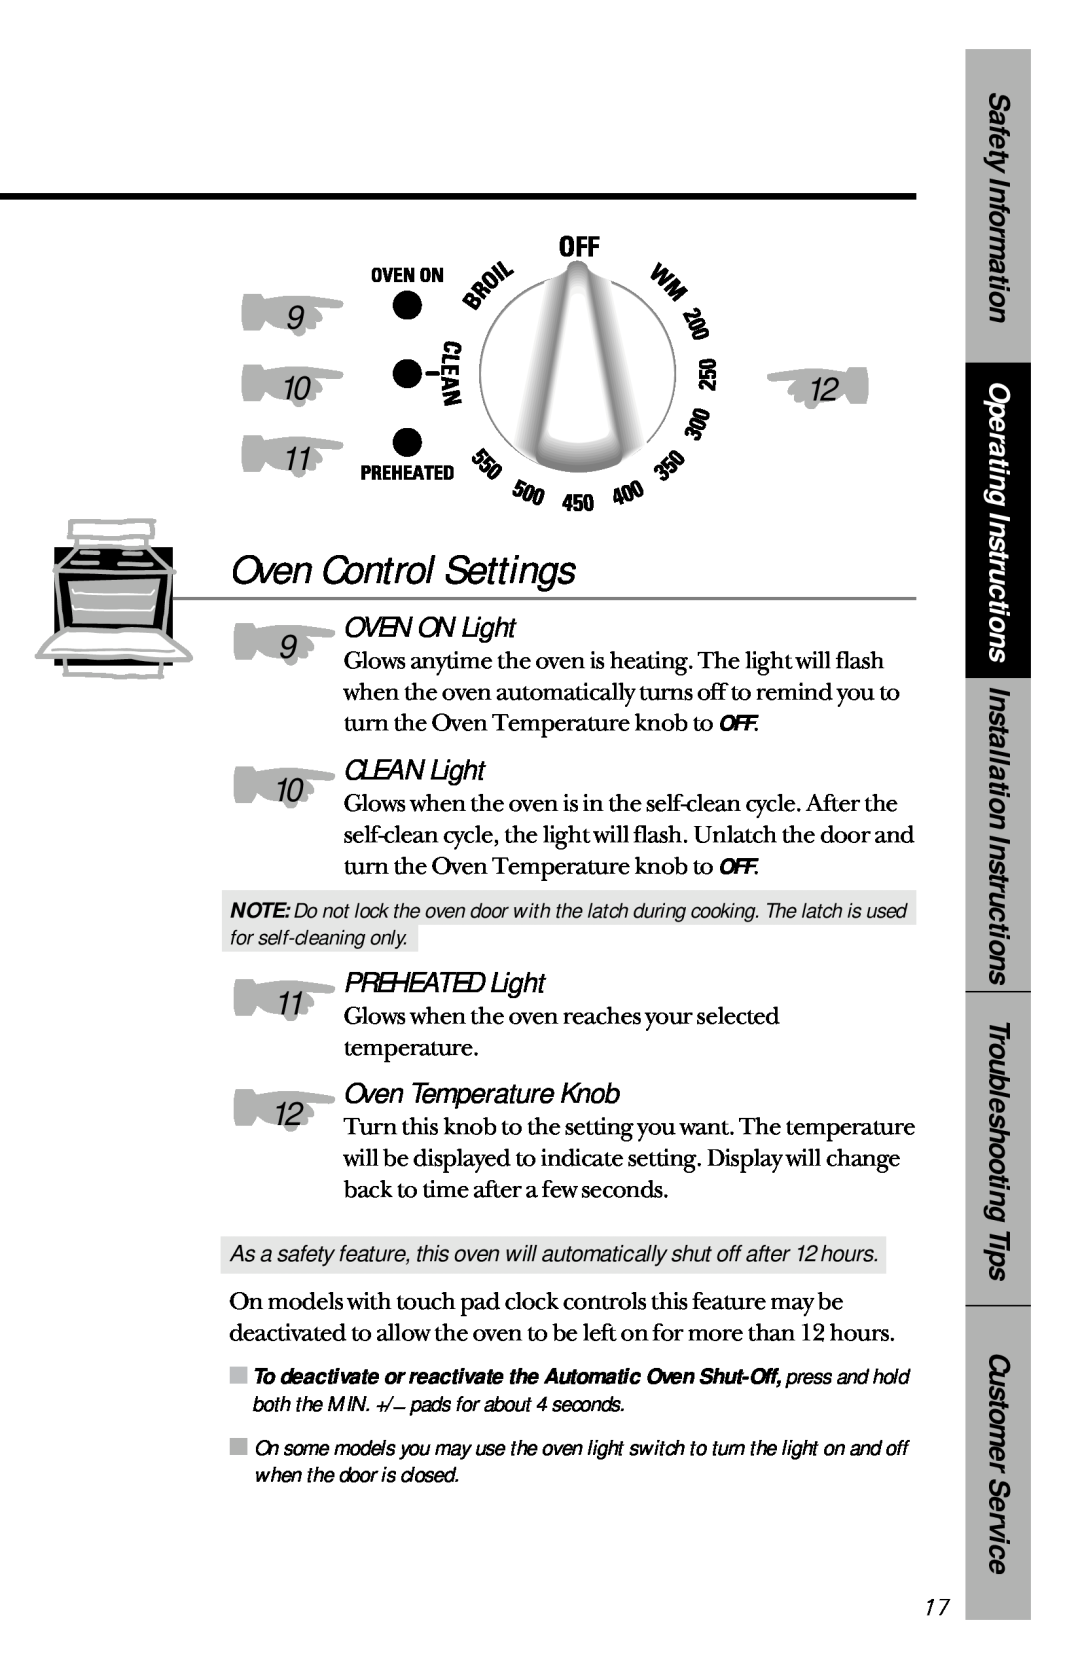 GE 164D3333P150 owner manual Oven Control Settings, OVEN ON Light, CLEAN Light, PREHEATED Light, Oven Temperature Knob 